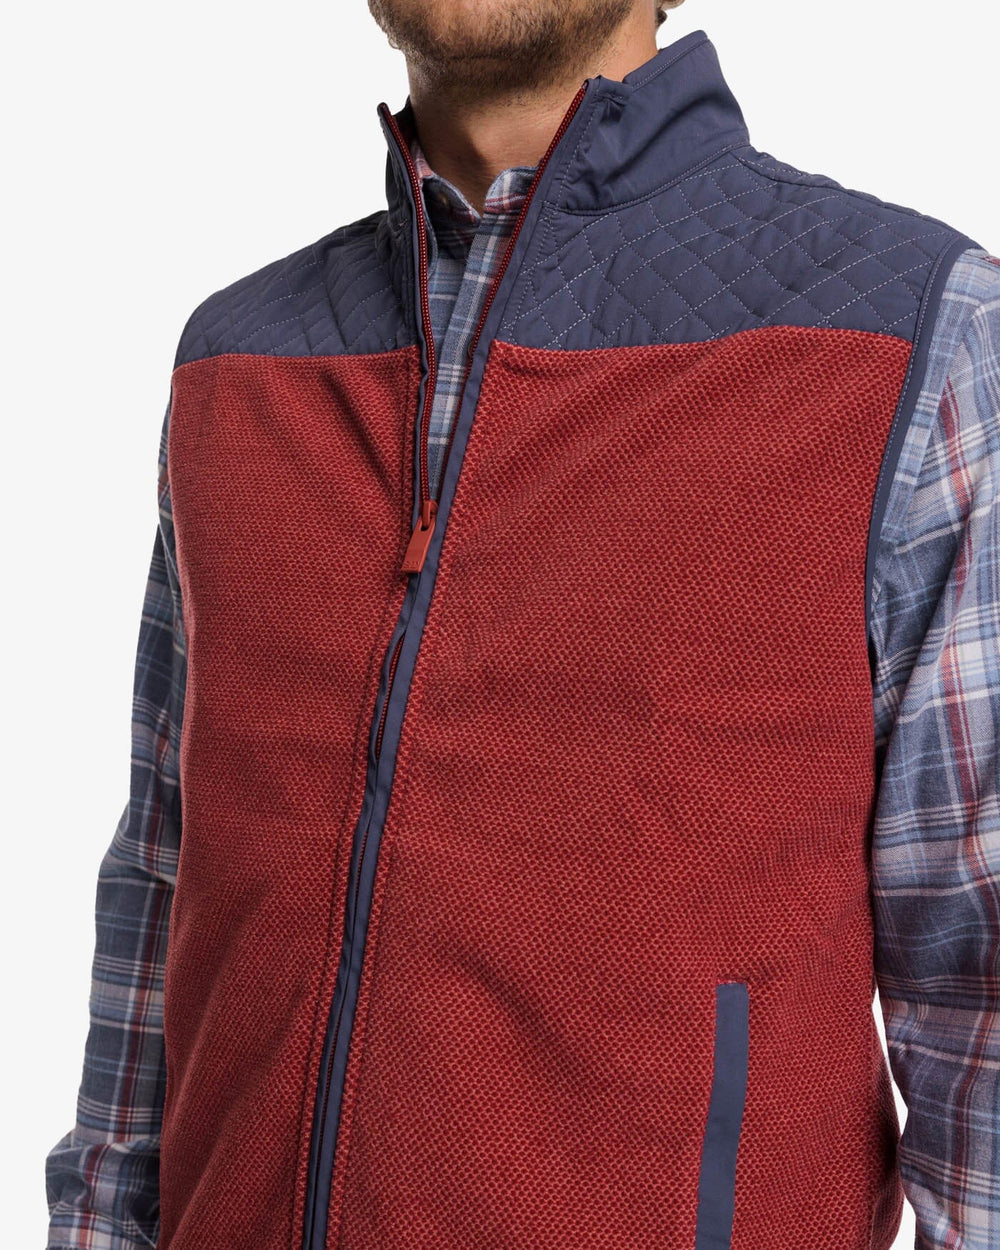 The detail view of the Southern Tide Hucksley Vest by Southern Tide - Tuscany Red